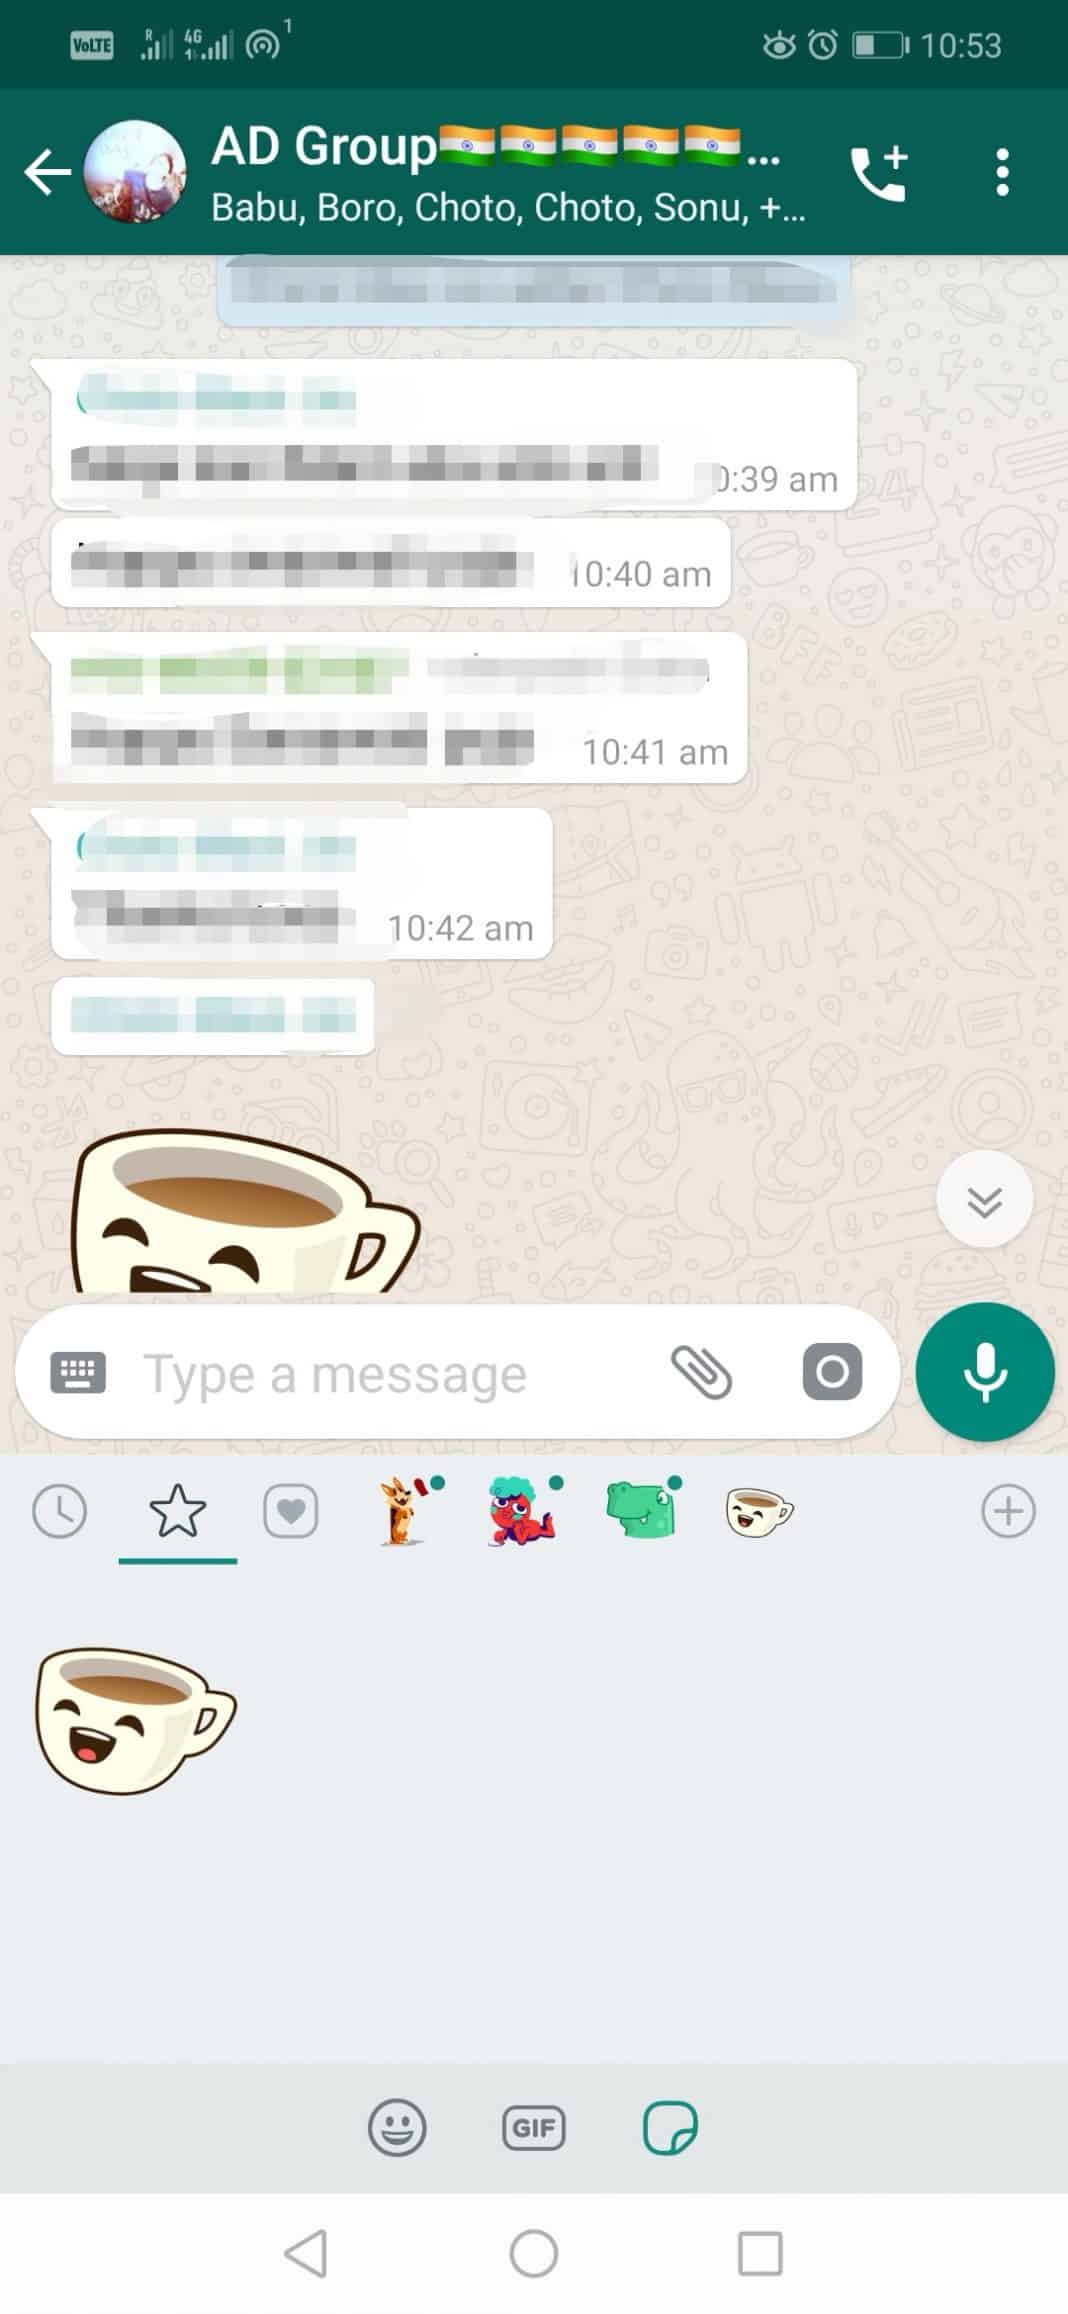 How To Save The Stickers Sent By Others On WhatsApp?